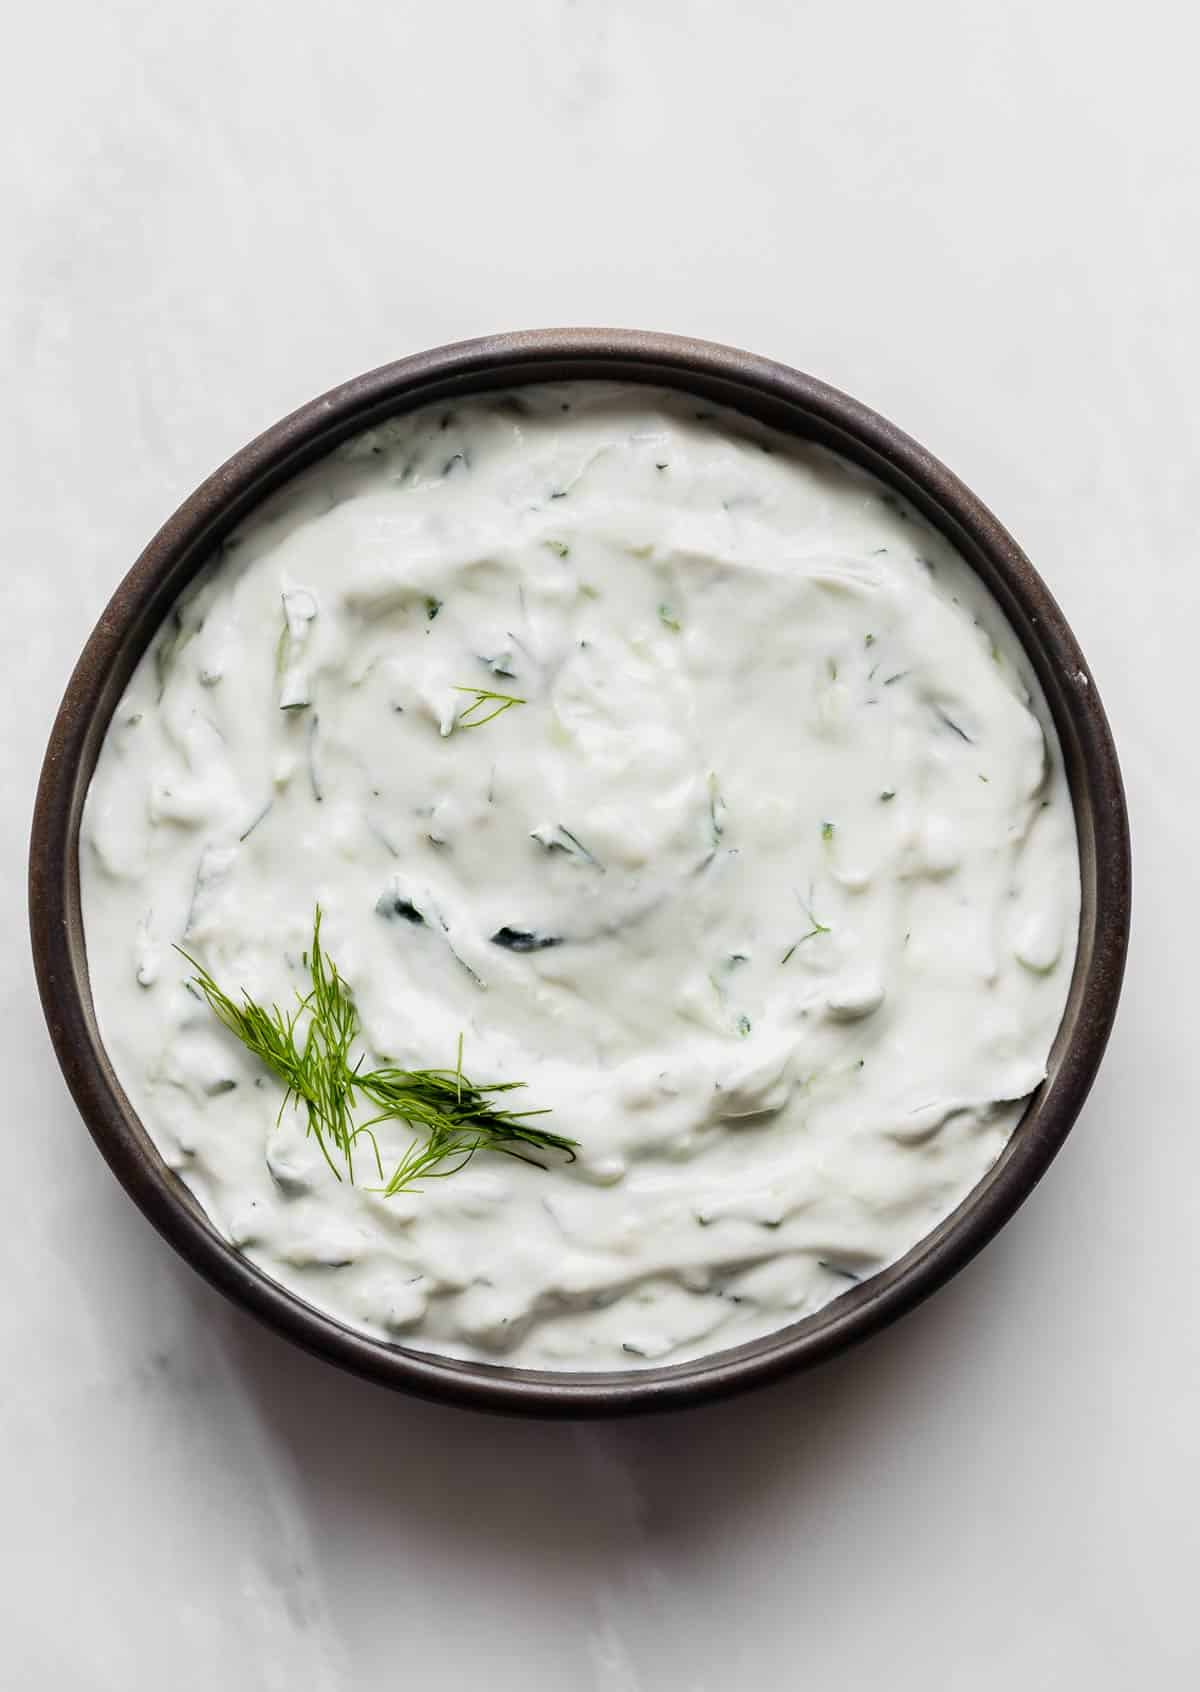 A black rimmed bowl filled with authentic Tzatziki sauce using shredded cucumber and fresh dill, on a white background.